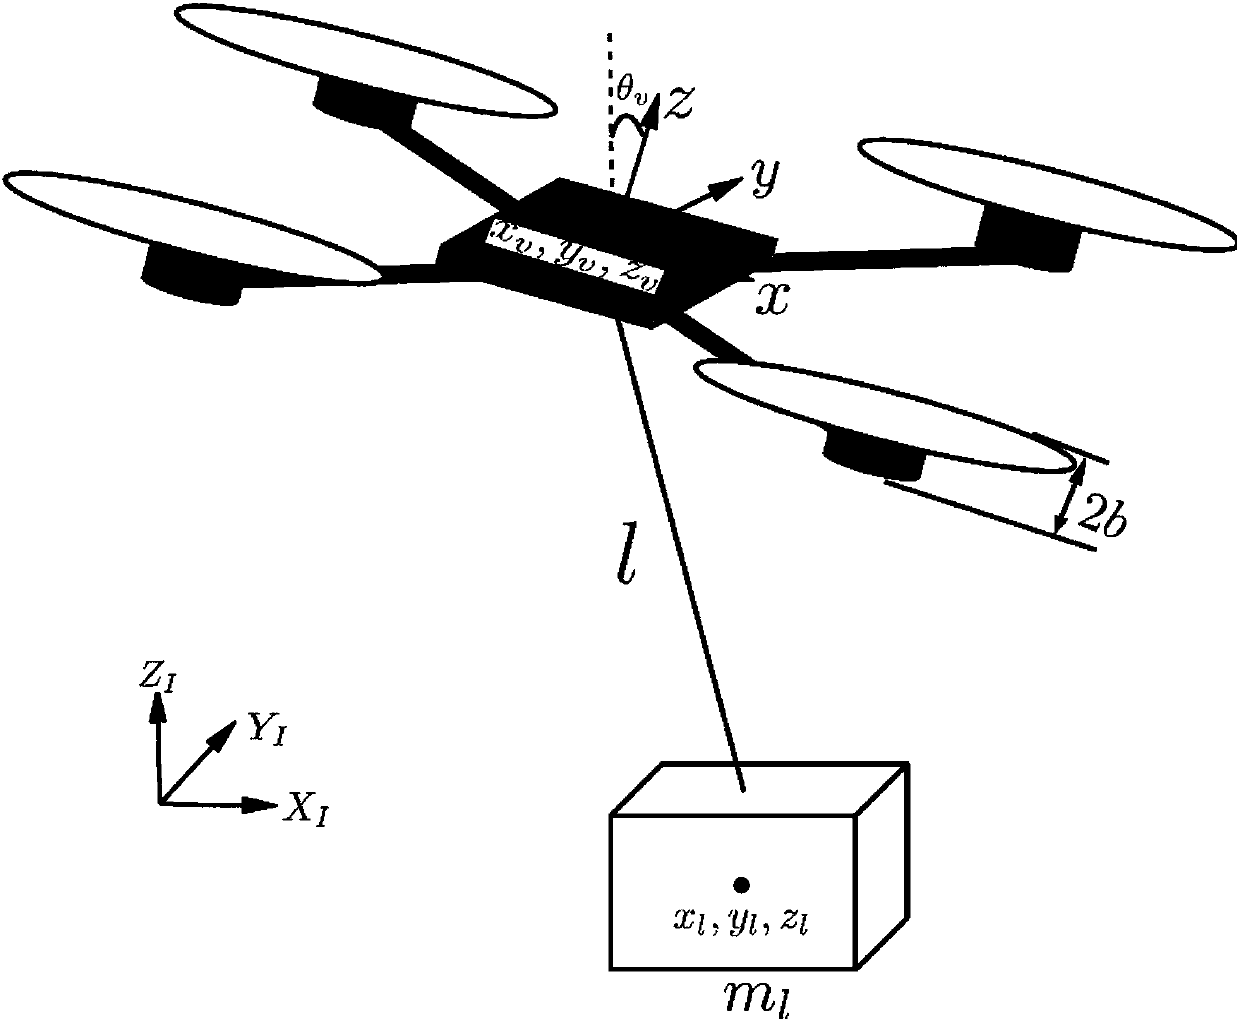 Stability analysis and control method for unmanned aerial vehicle suspension transportation based on differential quadrature method